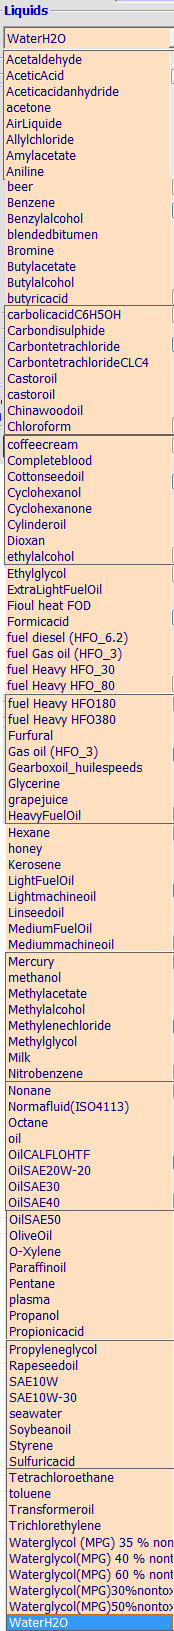 Lists of liquids whose density is given in the editor fluids mecaflux